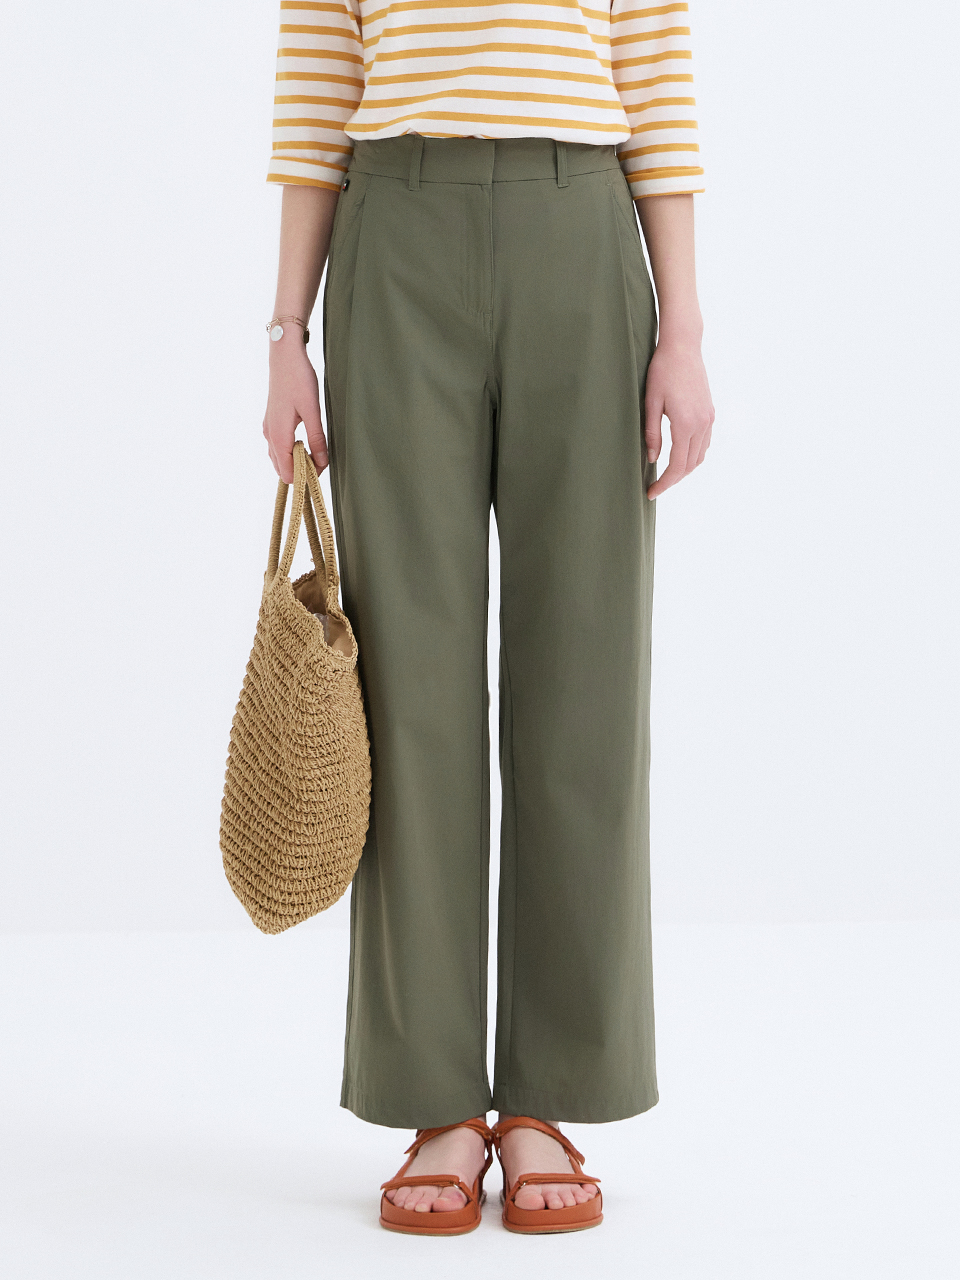 NEW SIGNATURE PERFECT FIT COLLPANTS (FOR WOMEN) - GARDEN OLIVE